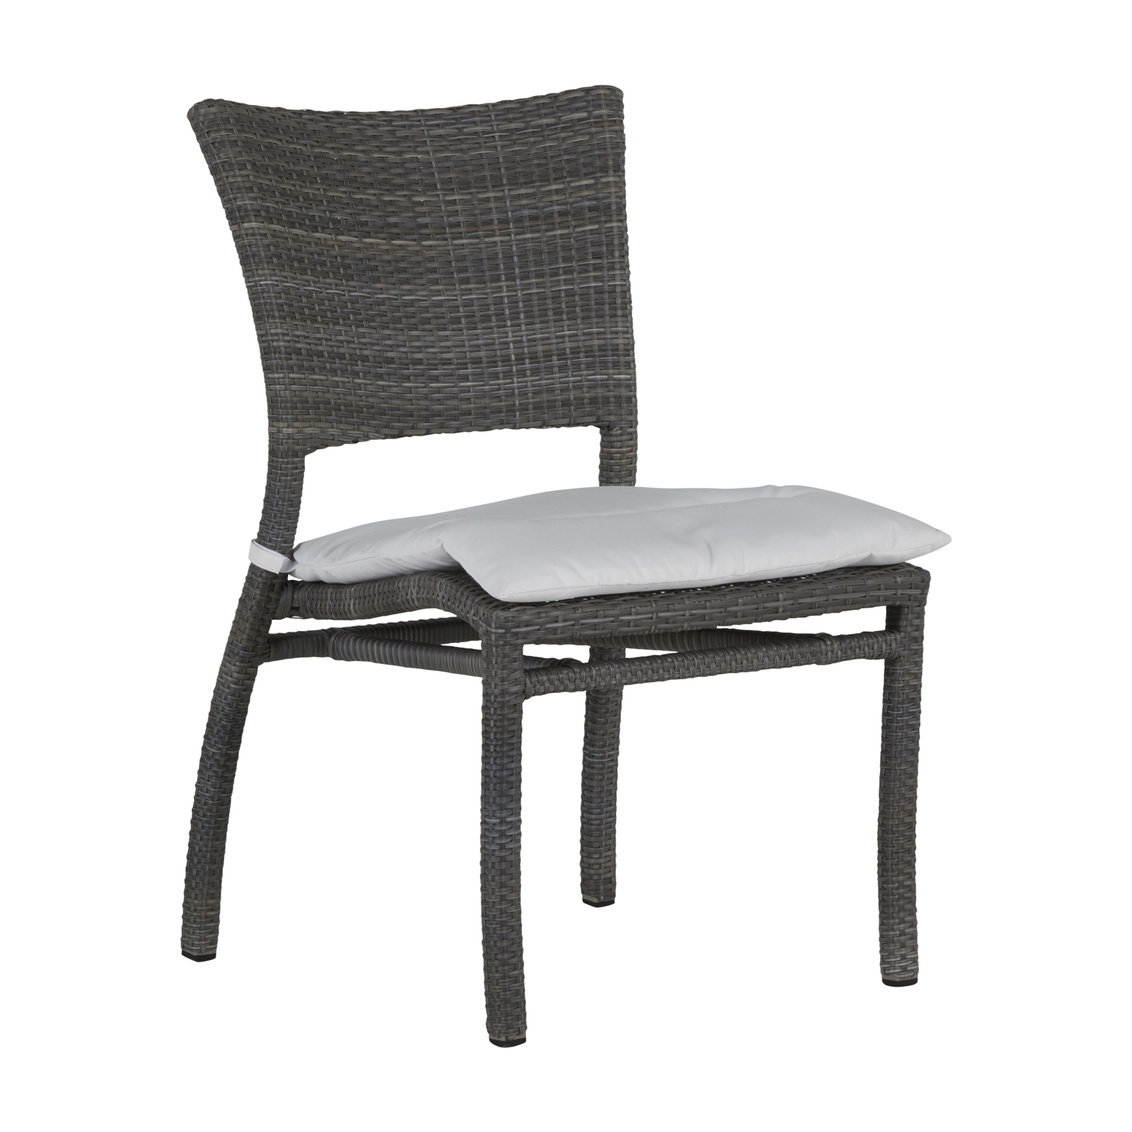 skye side chair in slate grey – frame only product image